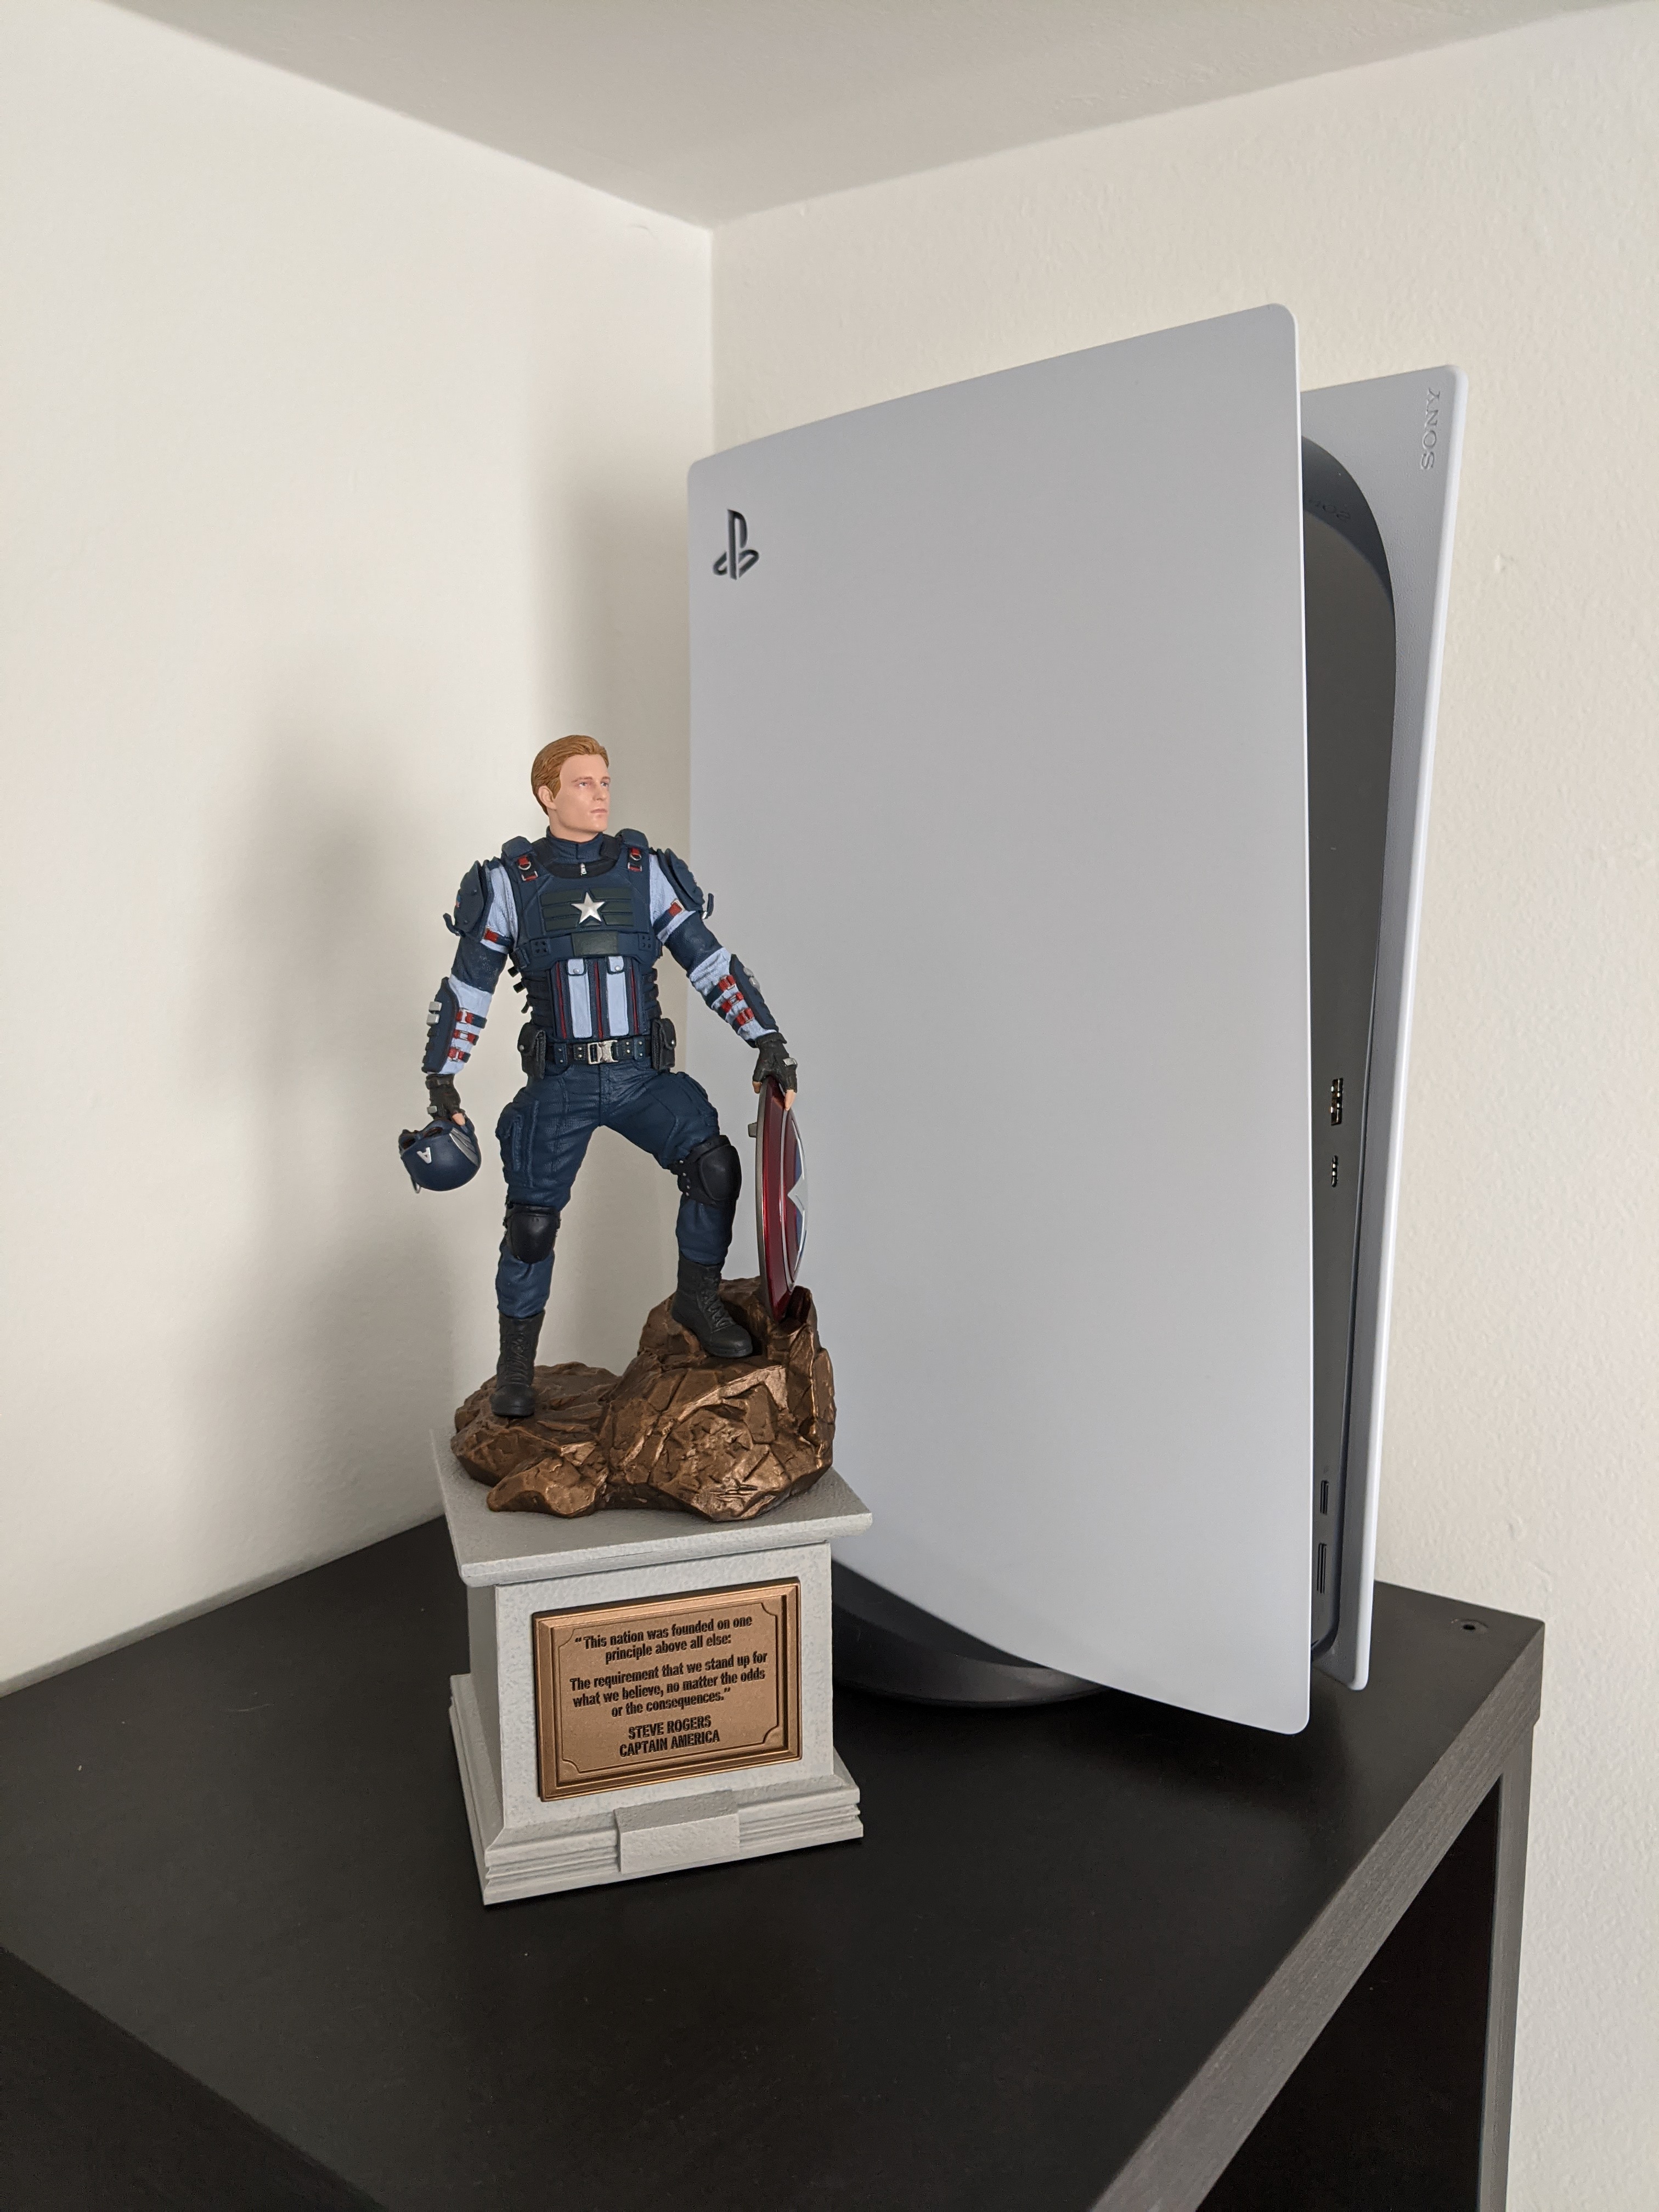 PS5 Next to Captain America Statue